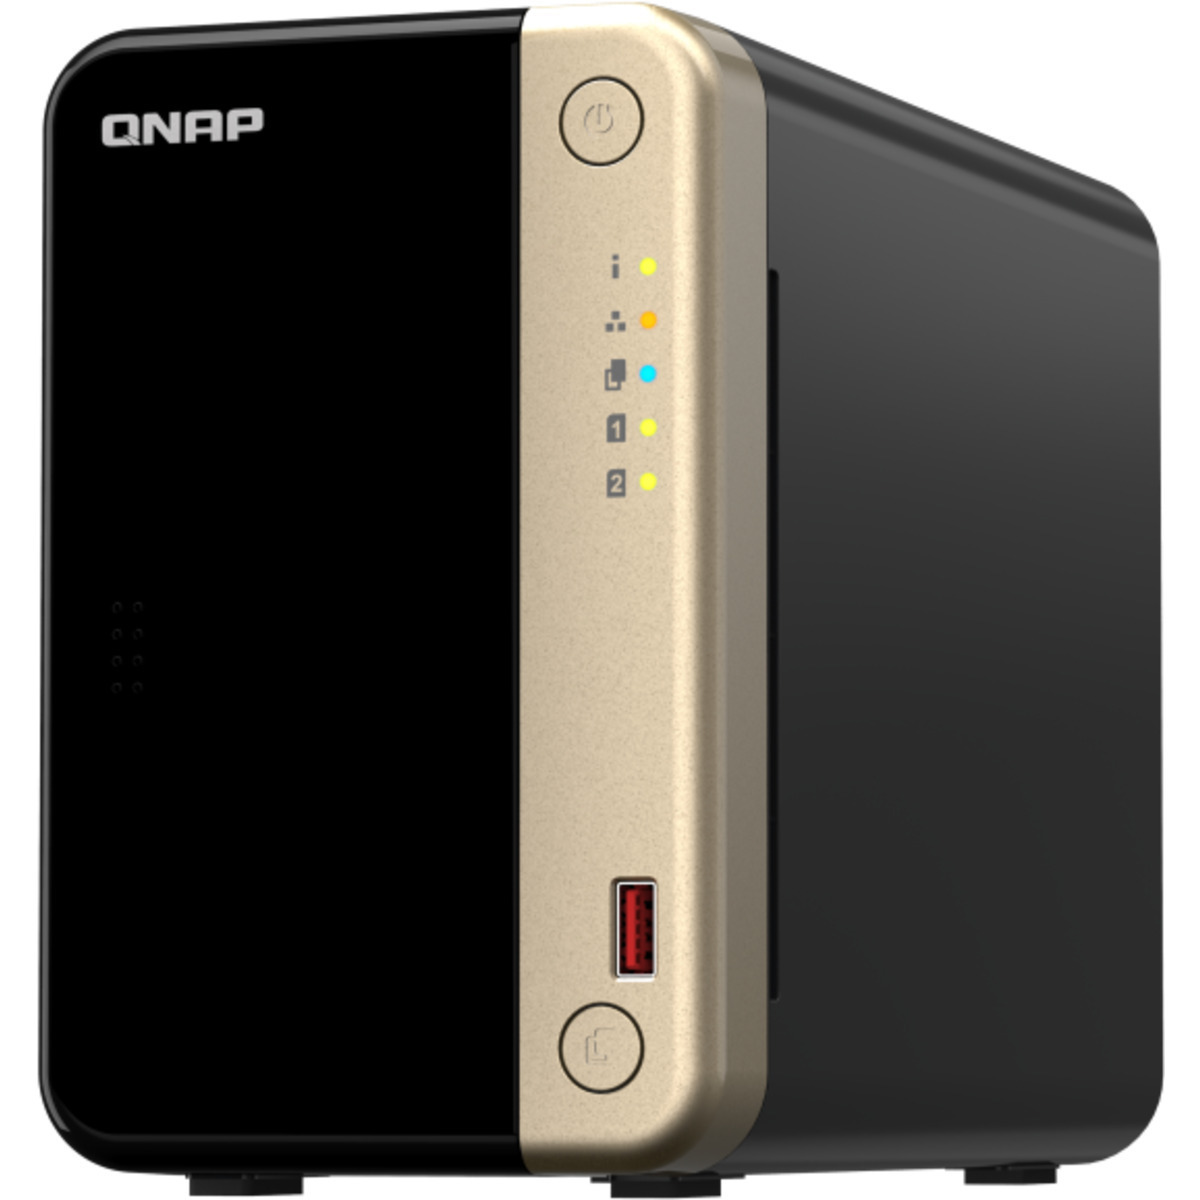 buy $1075 QNAP TS-264 16tb Desktop NAS - Network Attached Storage Device 2x8000gb Western Digital Gold WD8004FRYZ 3.5 7200rpm SATA 6Gb/s HDD ENTERPRISE Class Drives Installed - Burn-In Tested - nas headquarters buy network attached storage server device das new raid-5 free shipping simply usa TS-264